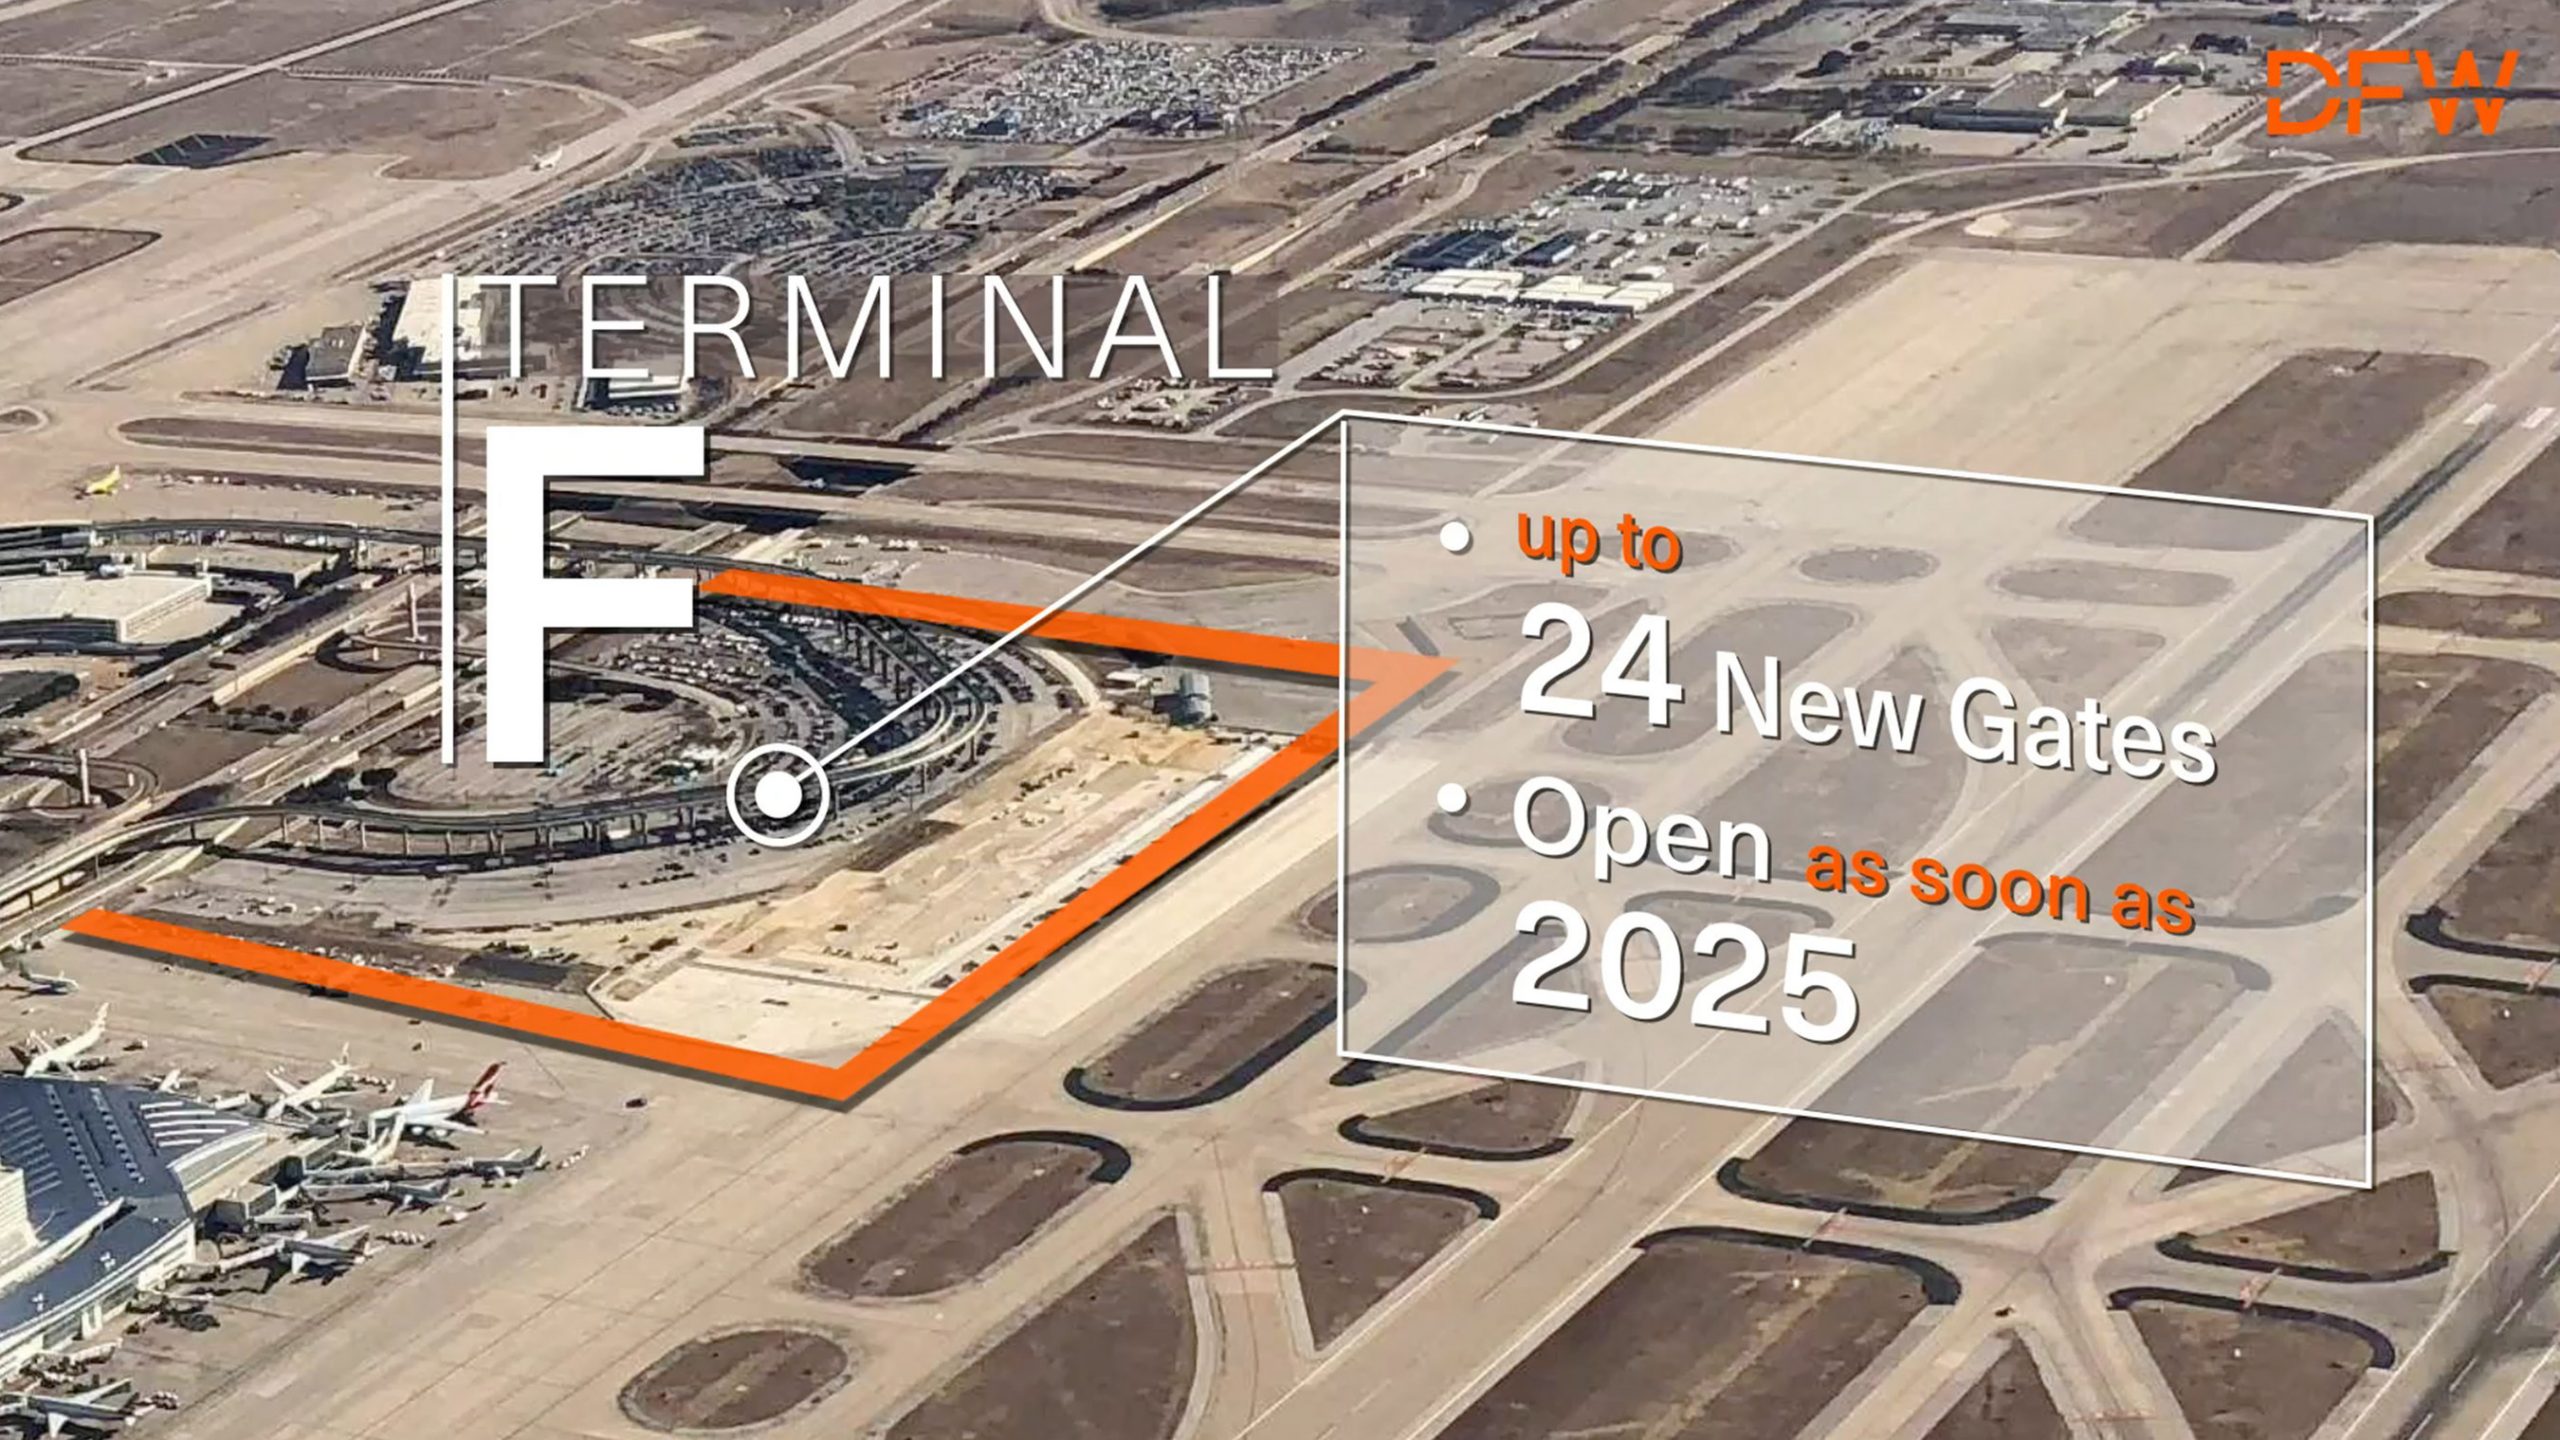 DFW and American Airlines announce $3.5 billion terminal plans